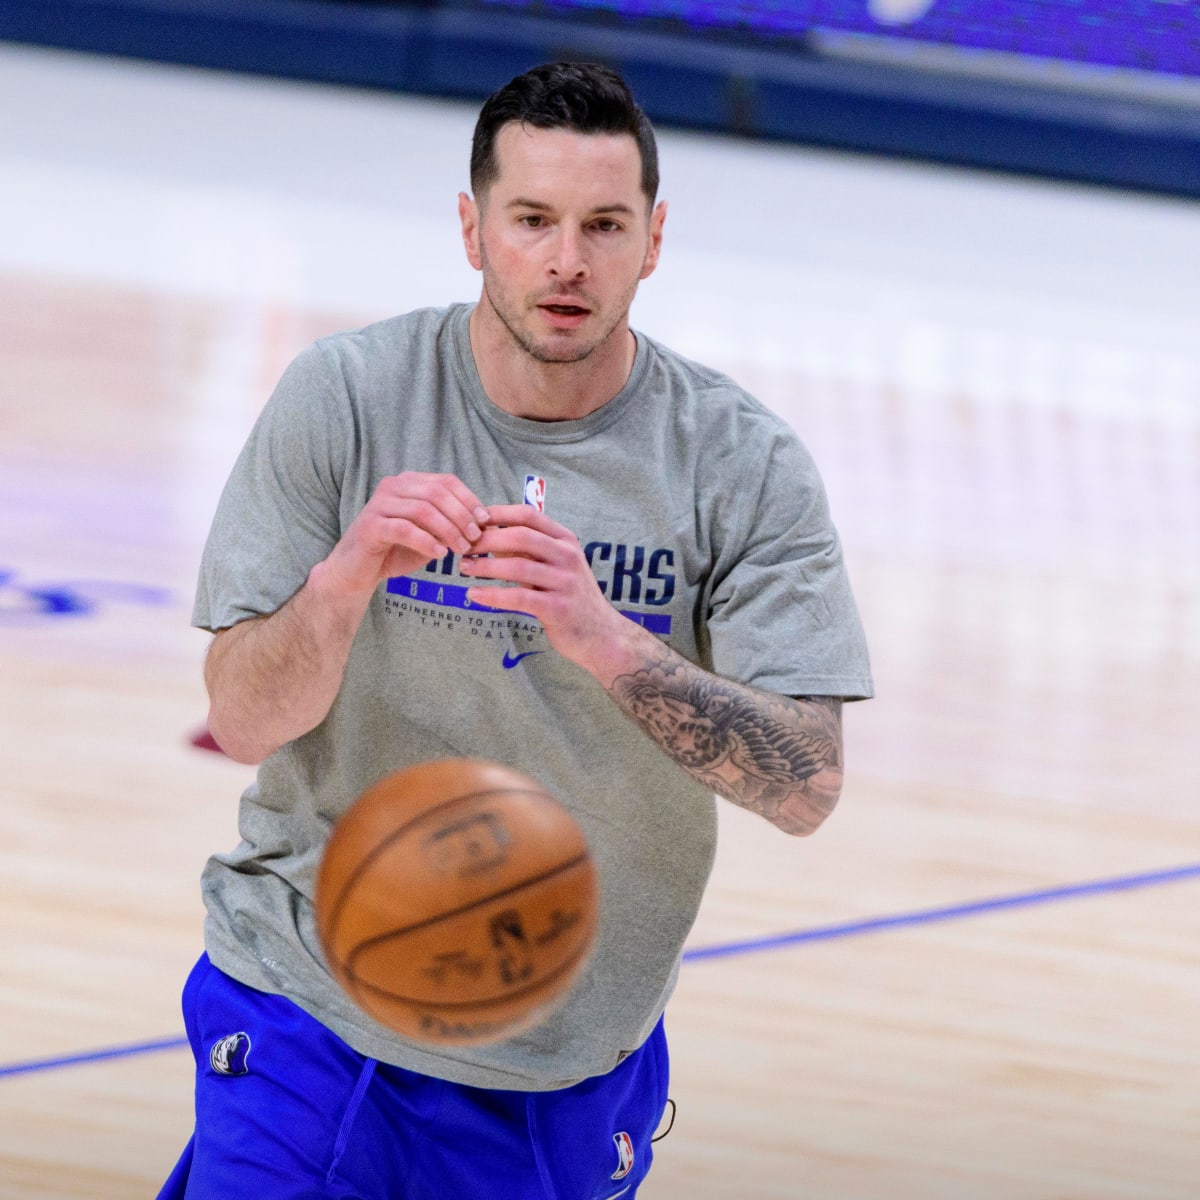 Clippers' Redick on his tattoos: 'I like the way a sleeve looks